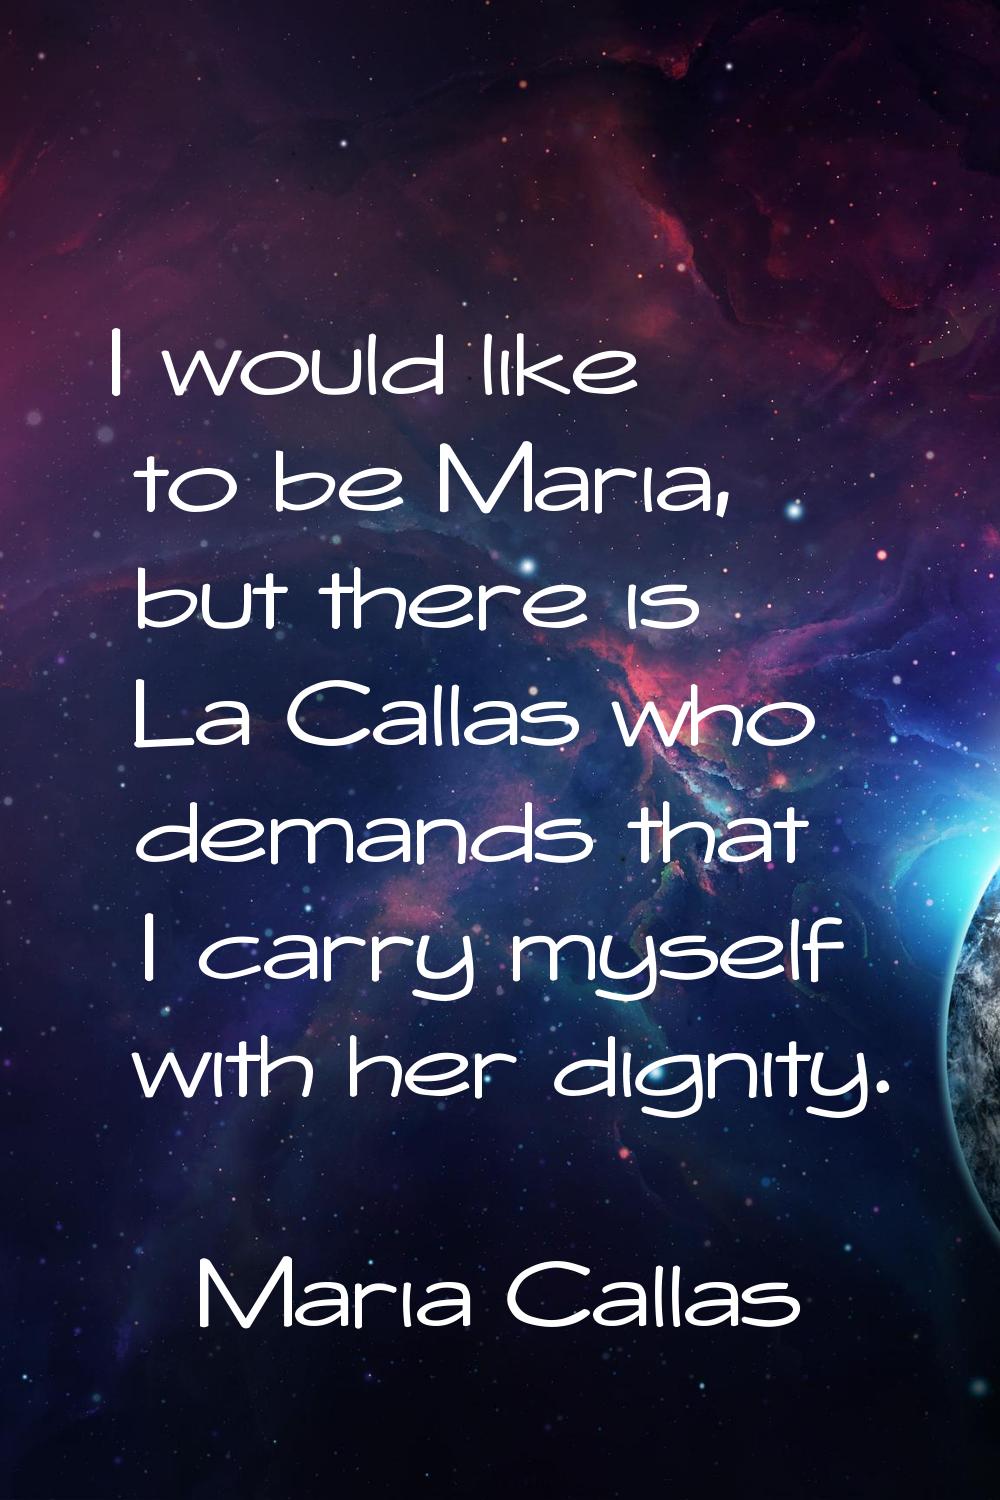 I would like to be Maria, but there is La Callas who demands that I carry myself with her dignity.